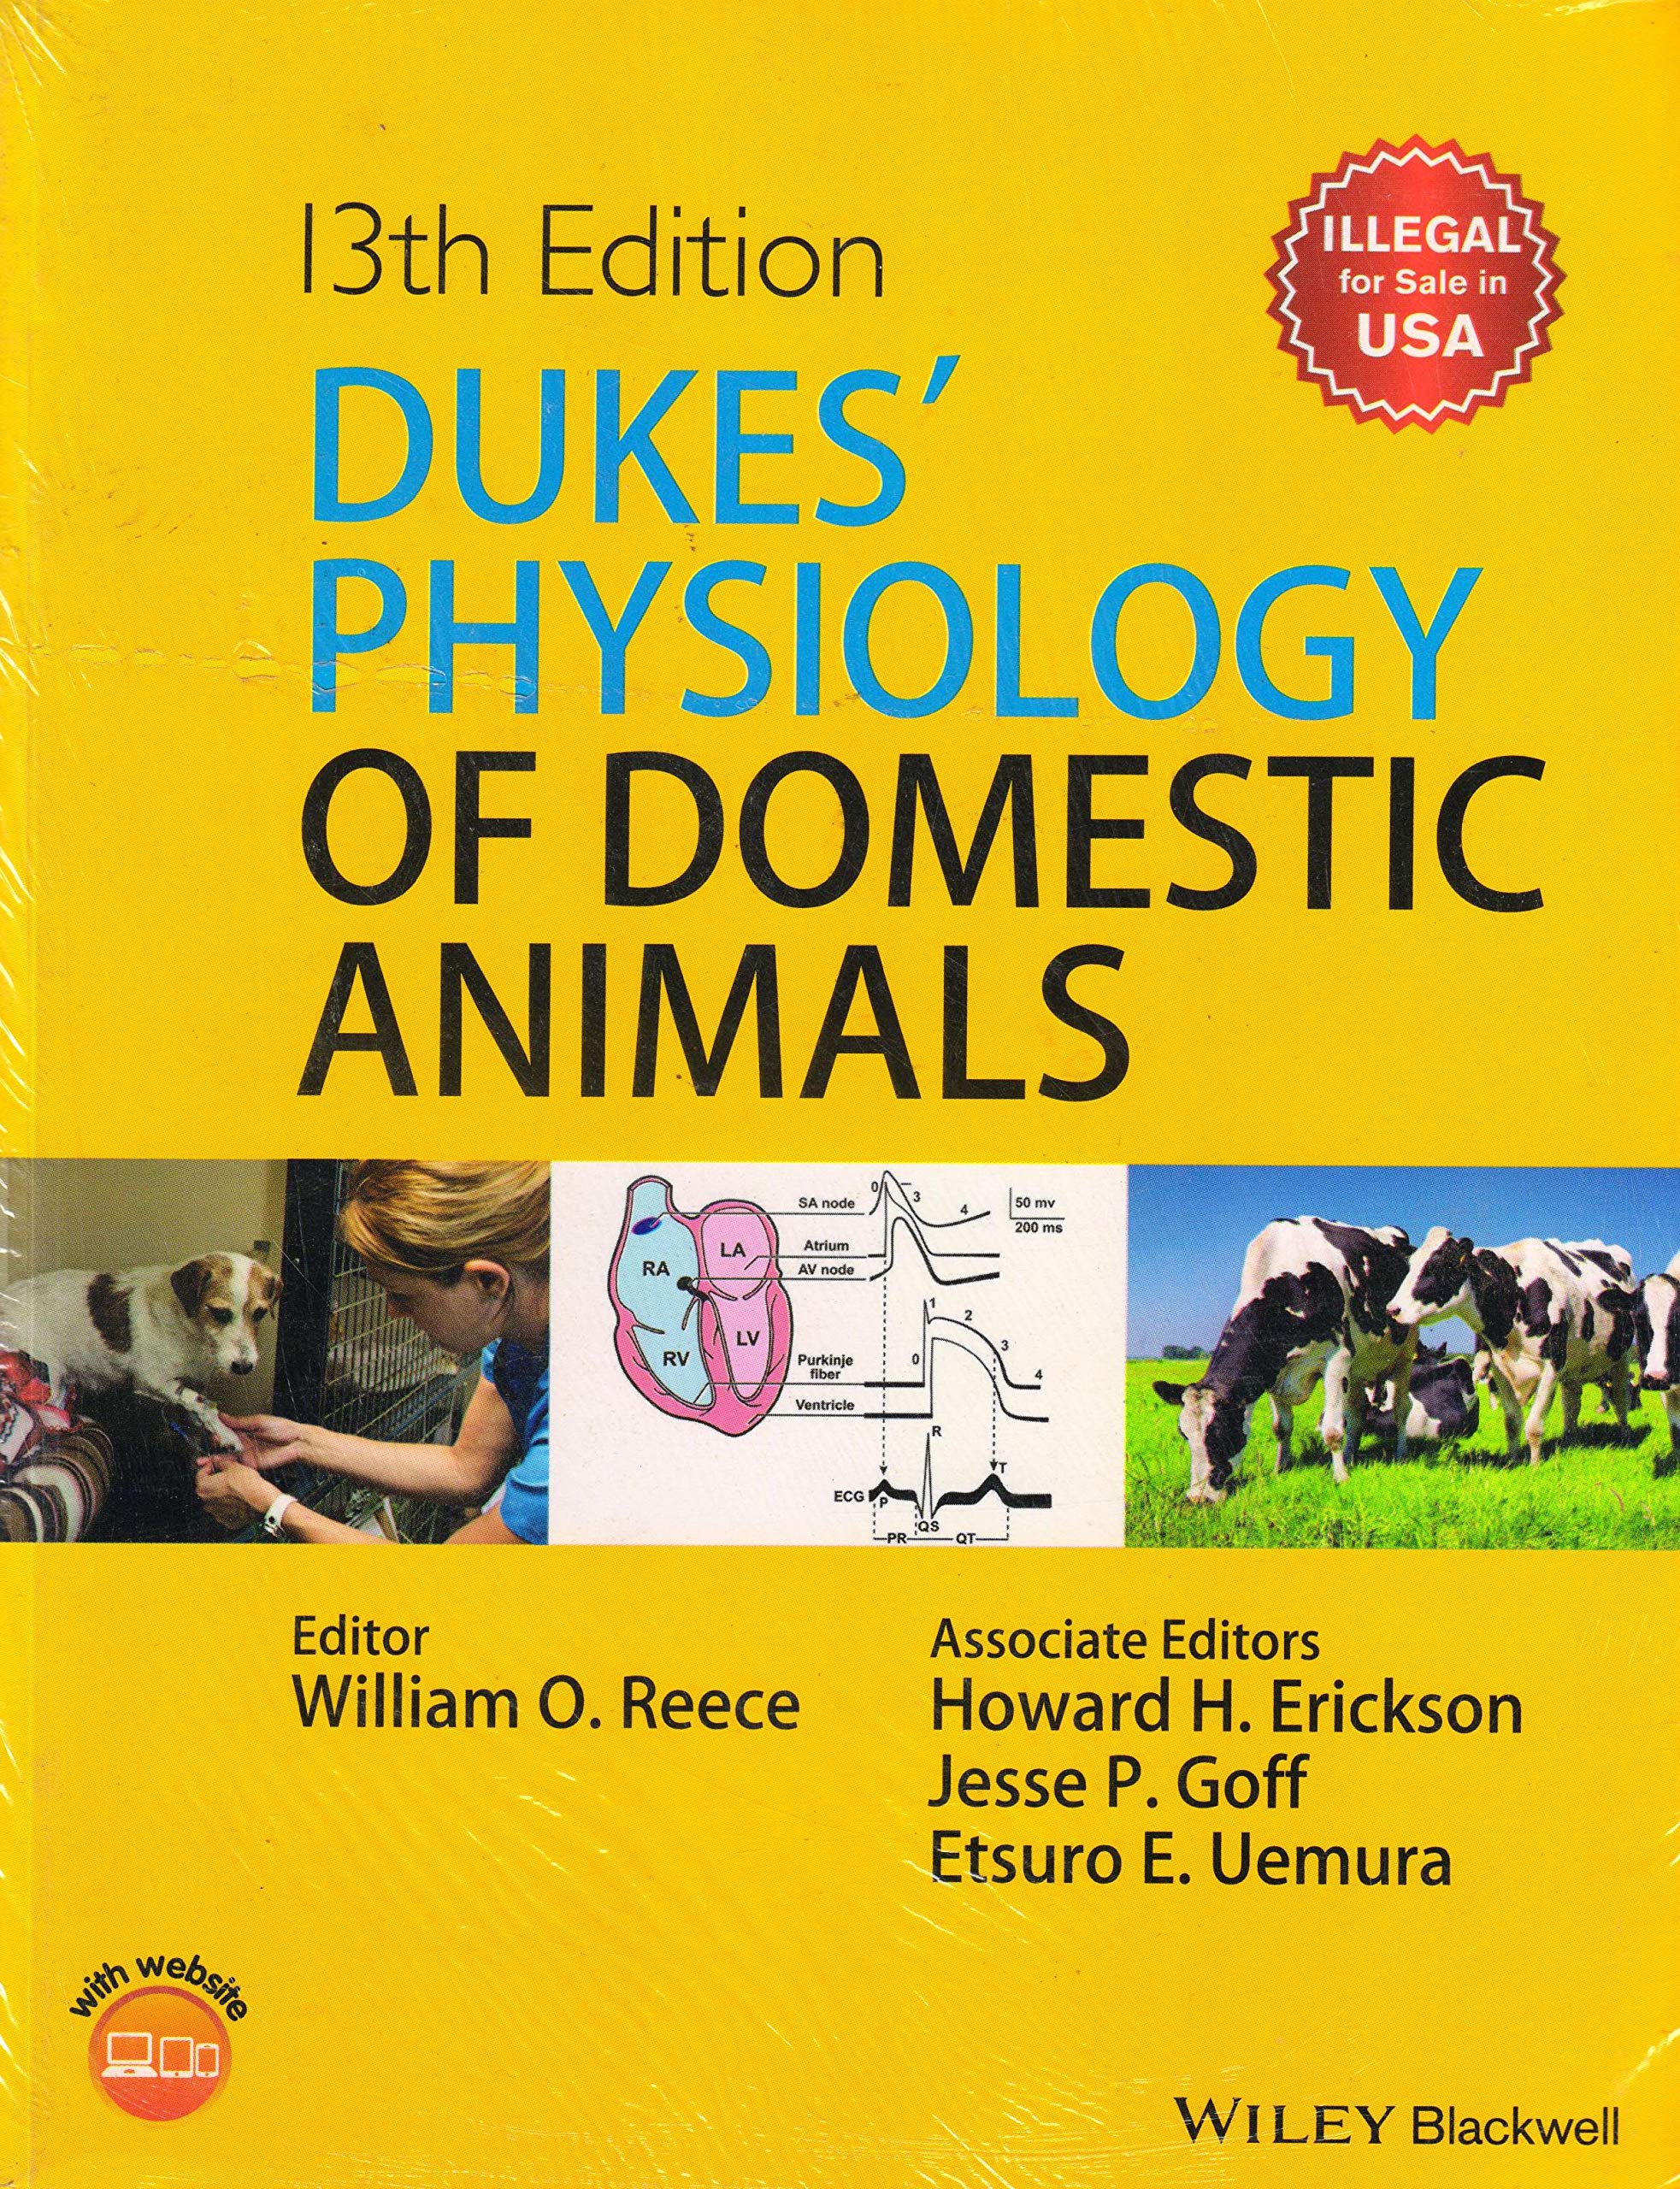 dukes-physiology-of-domestic-animal